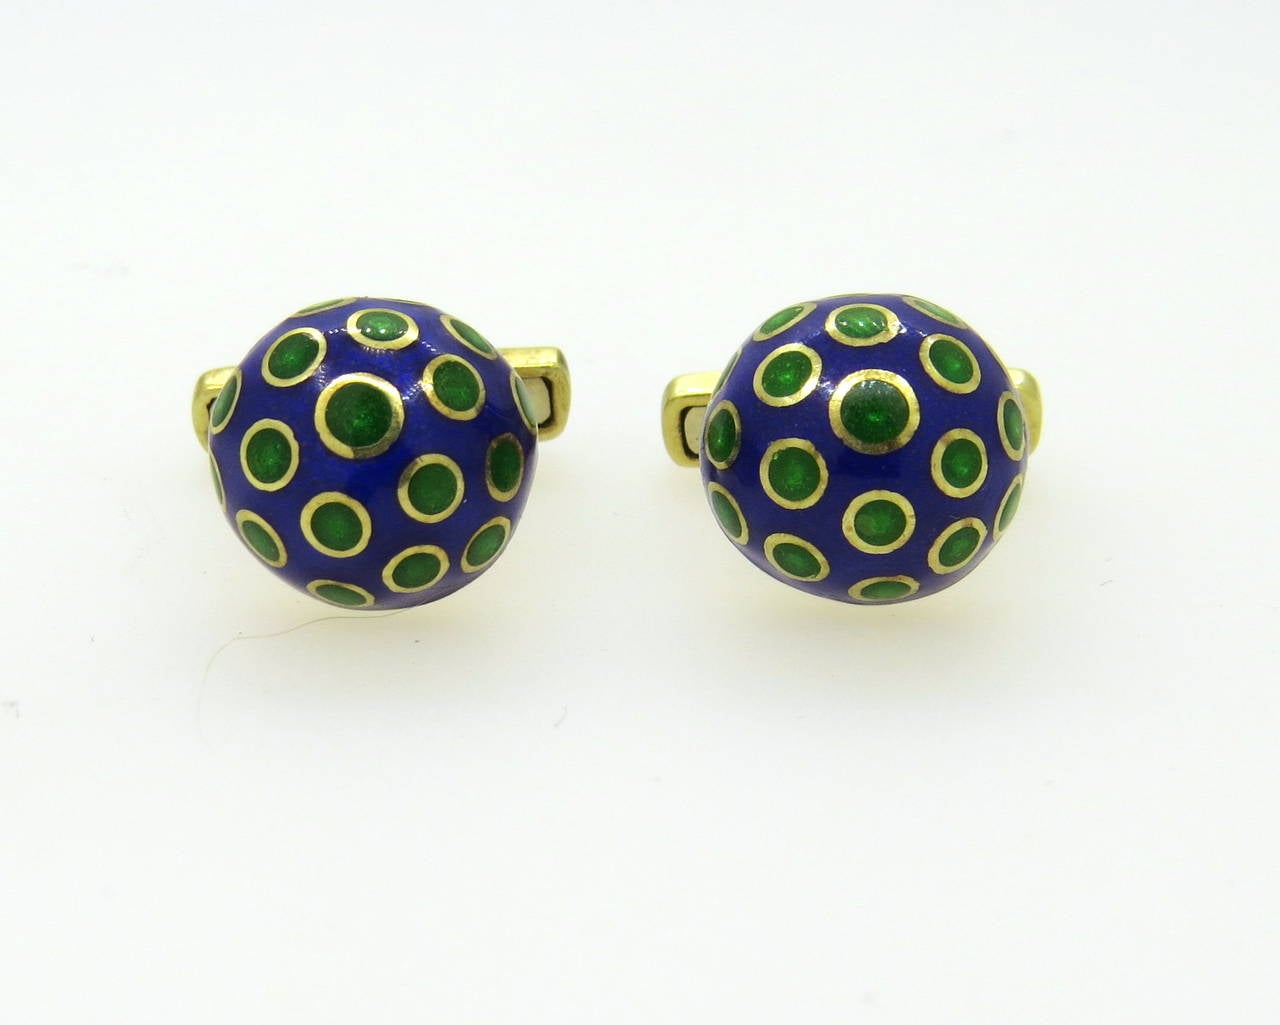 1960s 18k gold cufflinks, decorated with blue and green enamel. Top measures 16mm in diameter. Weight - 21.3 gr